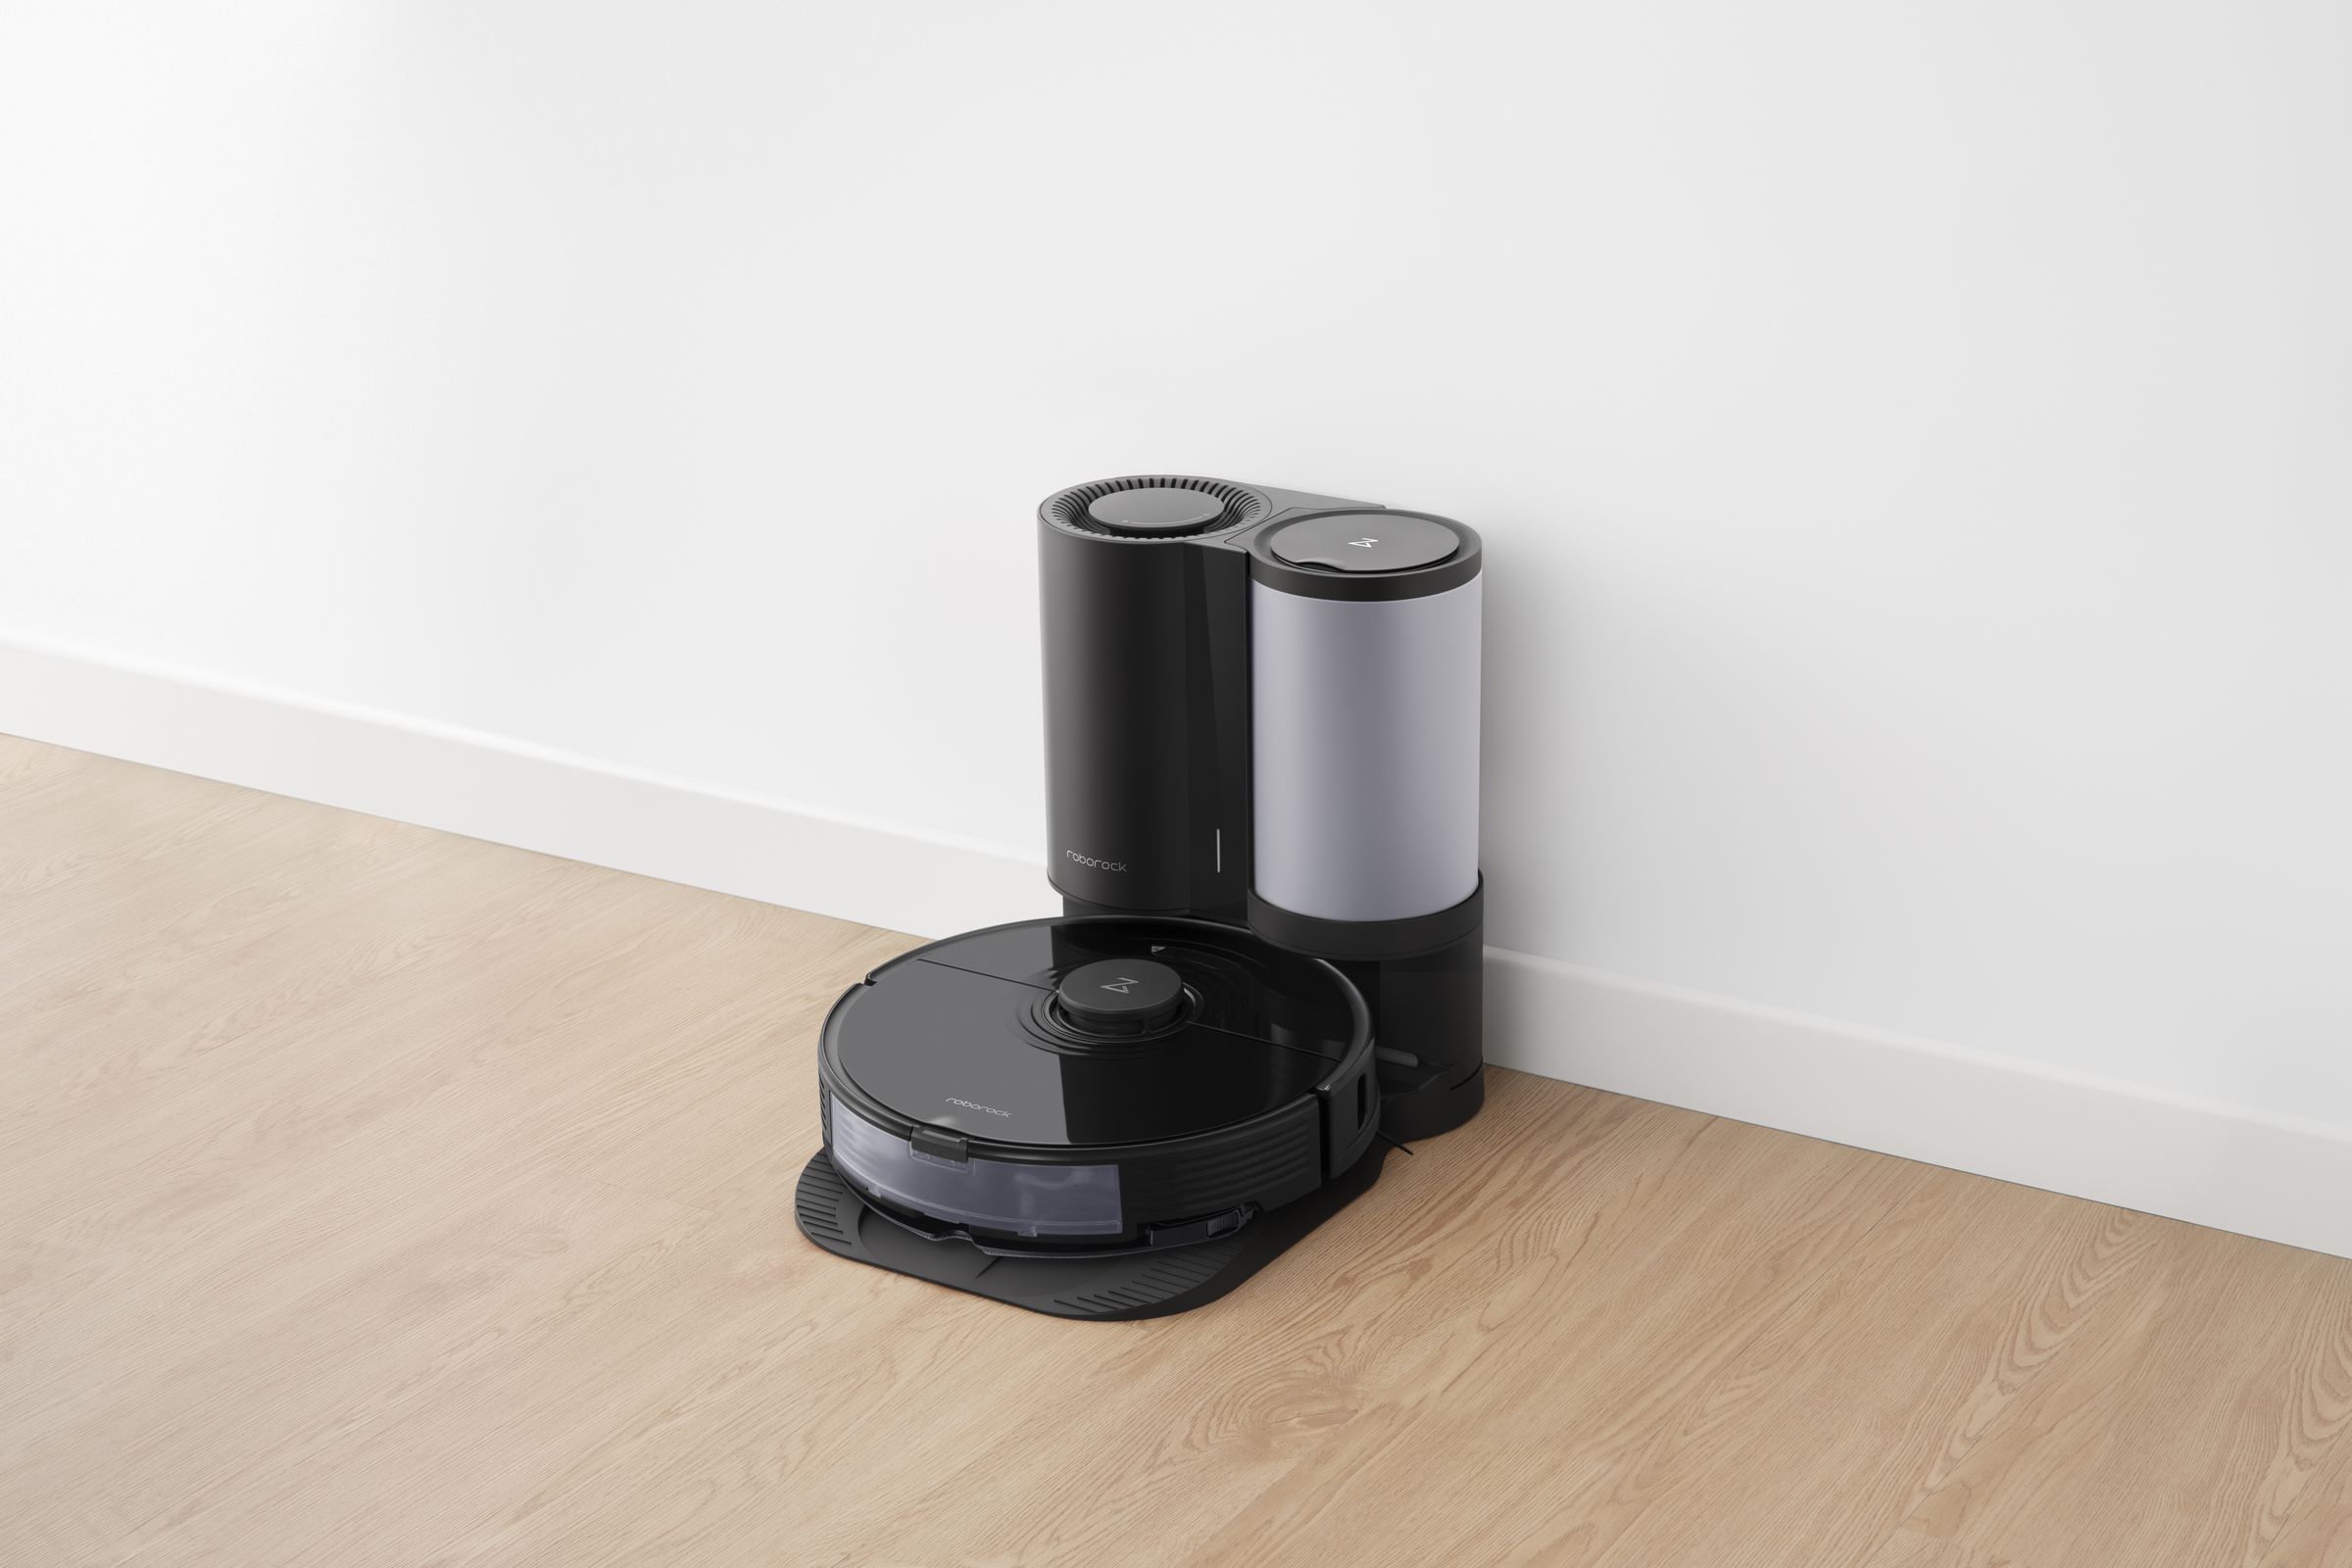 The Roborock S7 vacuum and mop is seeing its first discounts this Black Friday and Cyber Monday.